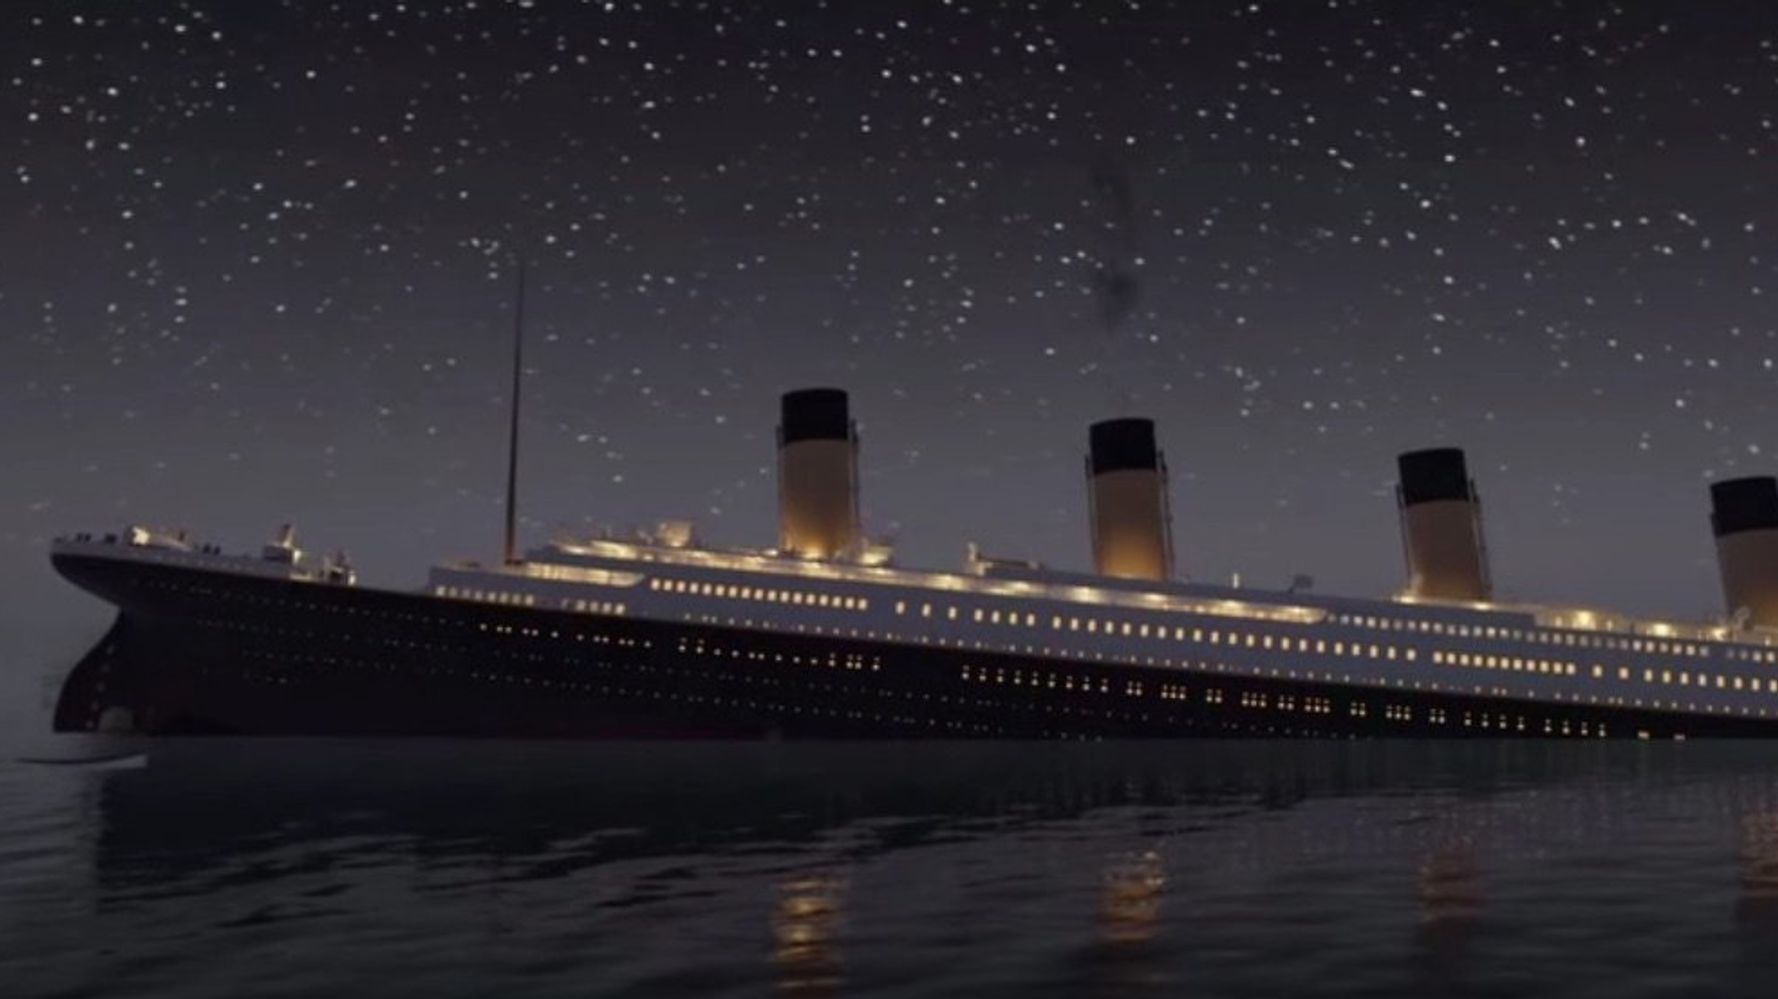 Watch The Titanic Sink In Real Time In Eerie Animated Recreation | HuffPost  Impact